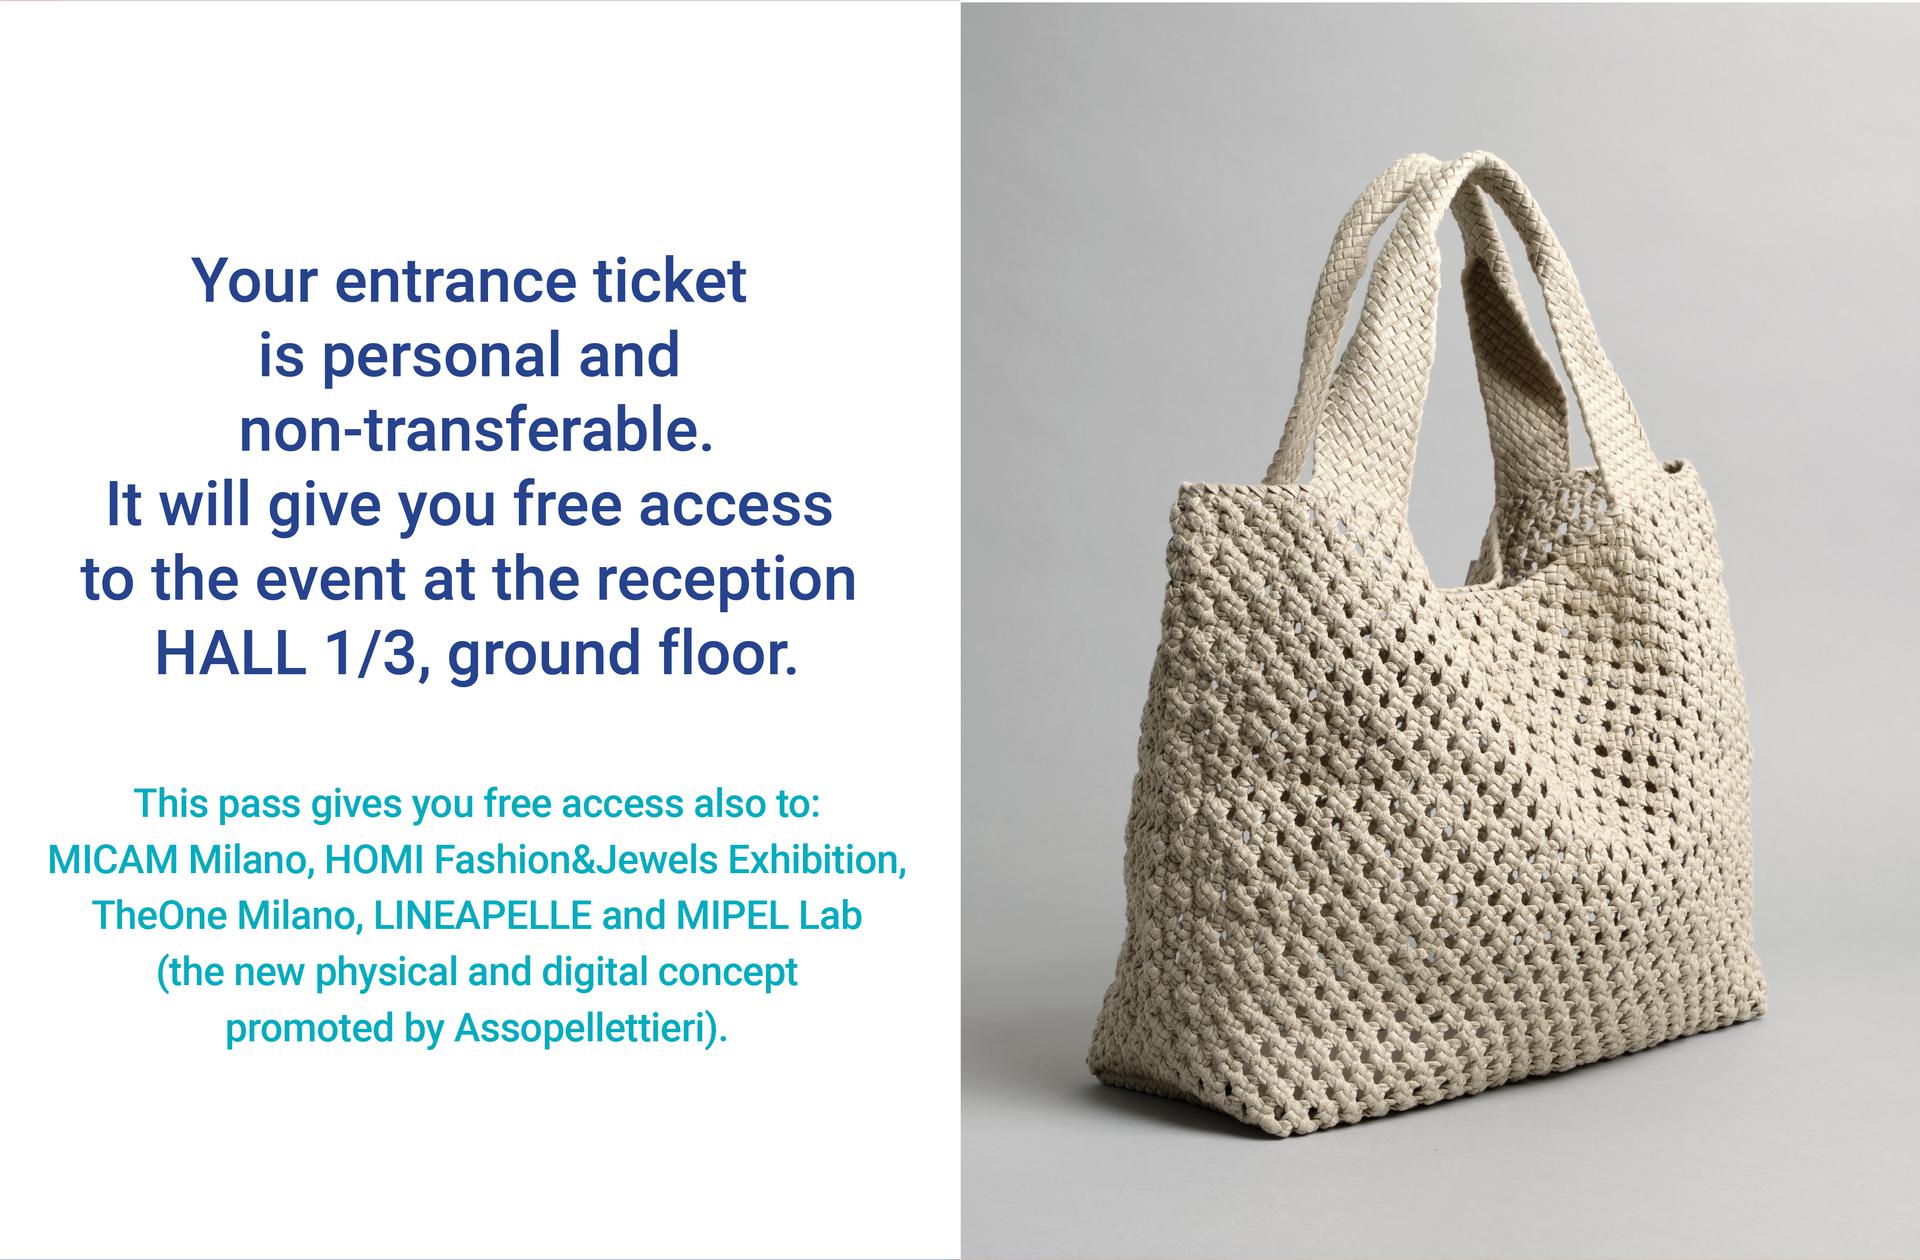 Your entrance ticket is personal and non-transferable. 